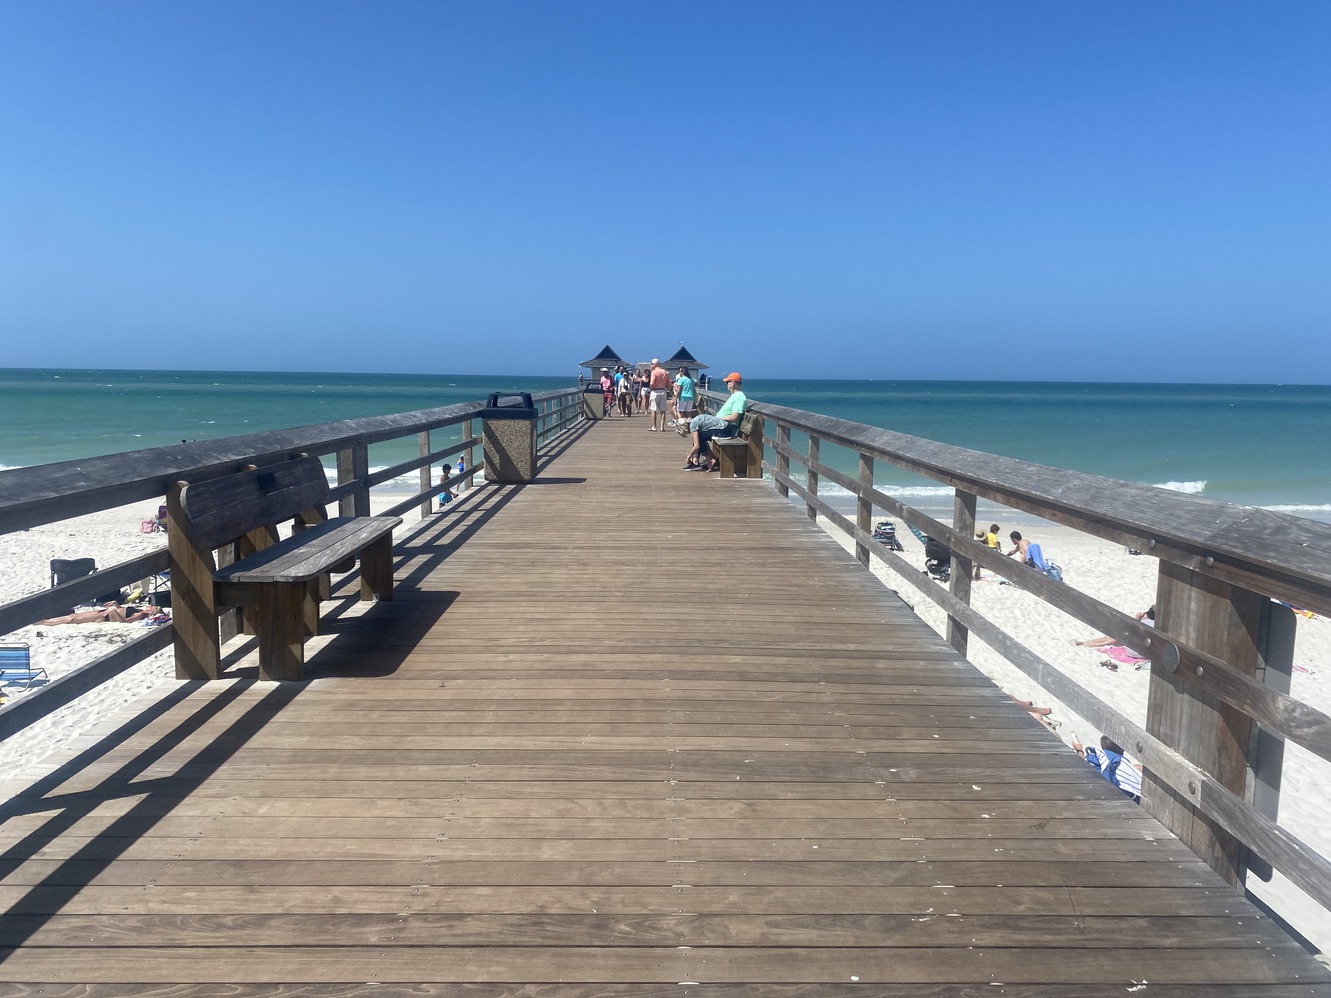 The Naples Pier looks out into the Gulf.